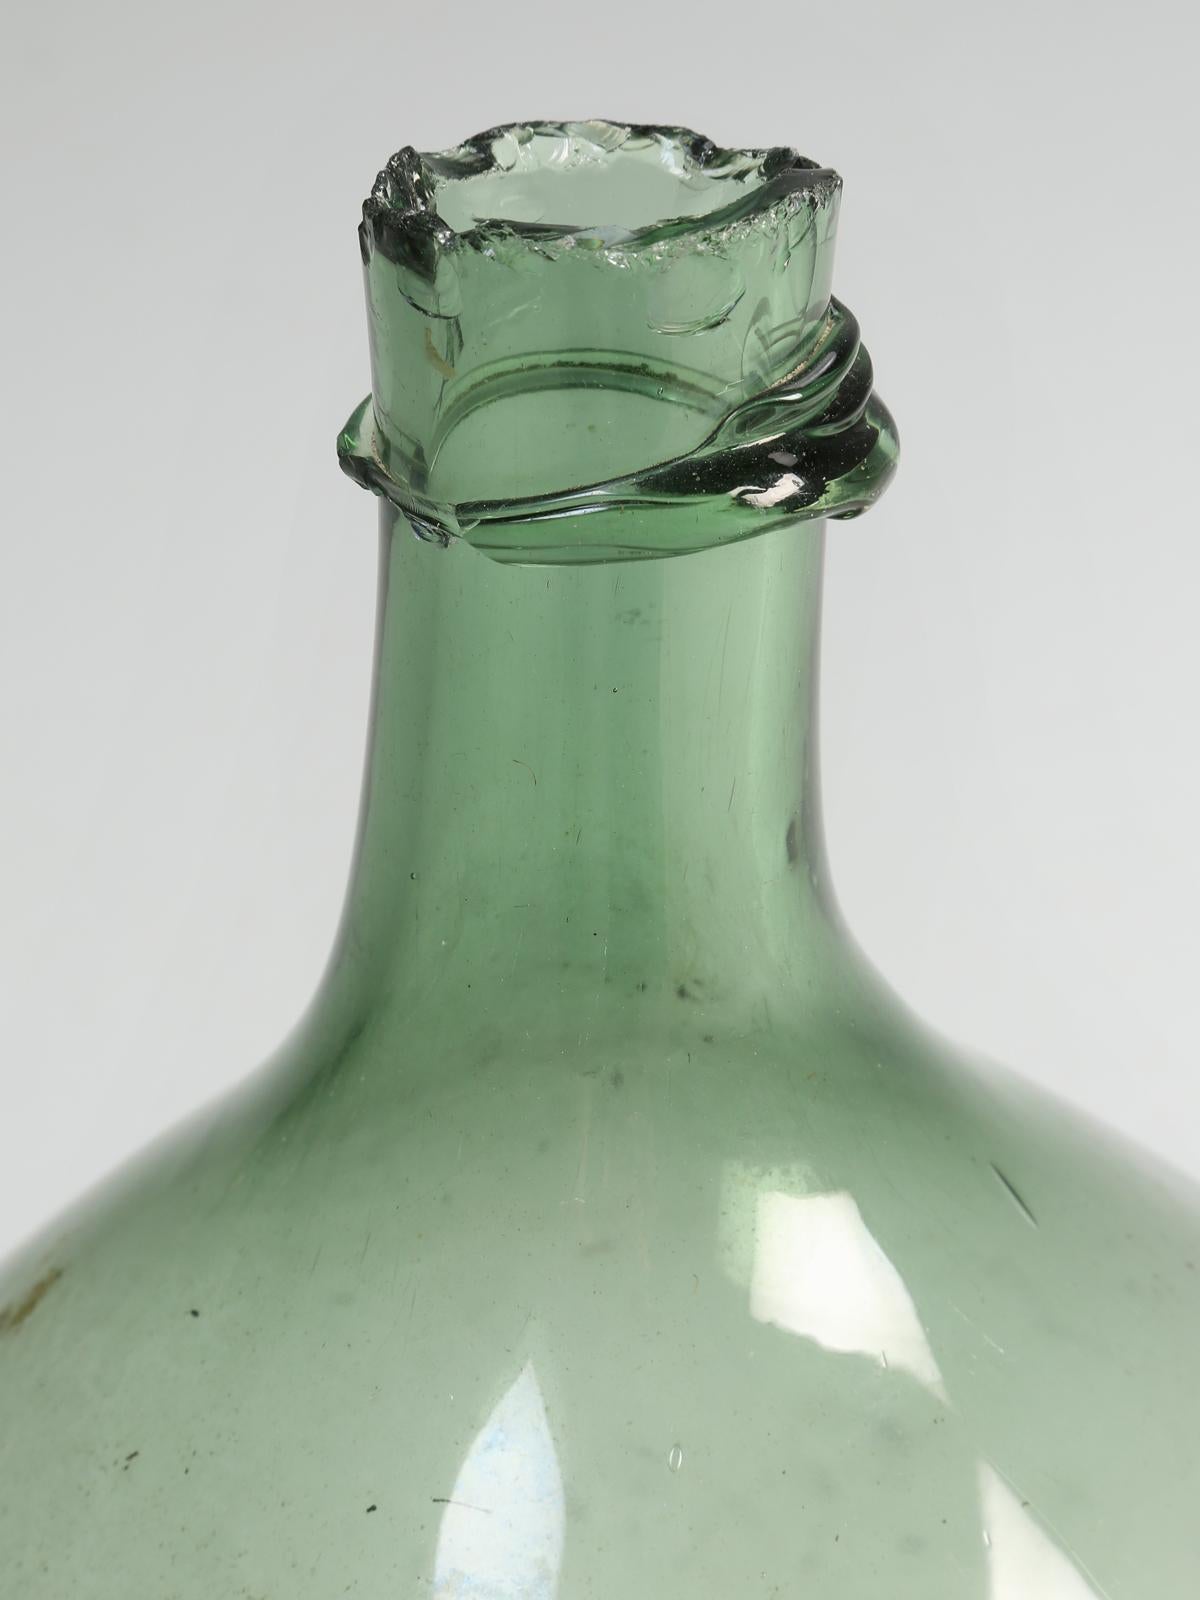 Early 20th Century Antique French Demijohn or Carboy Large Glass Bottle